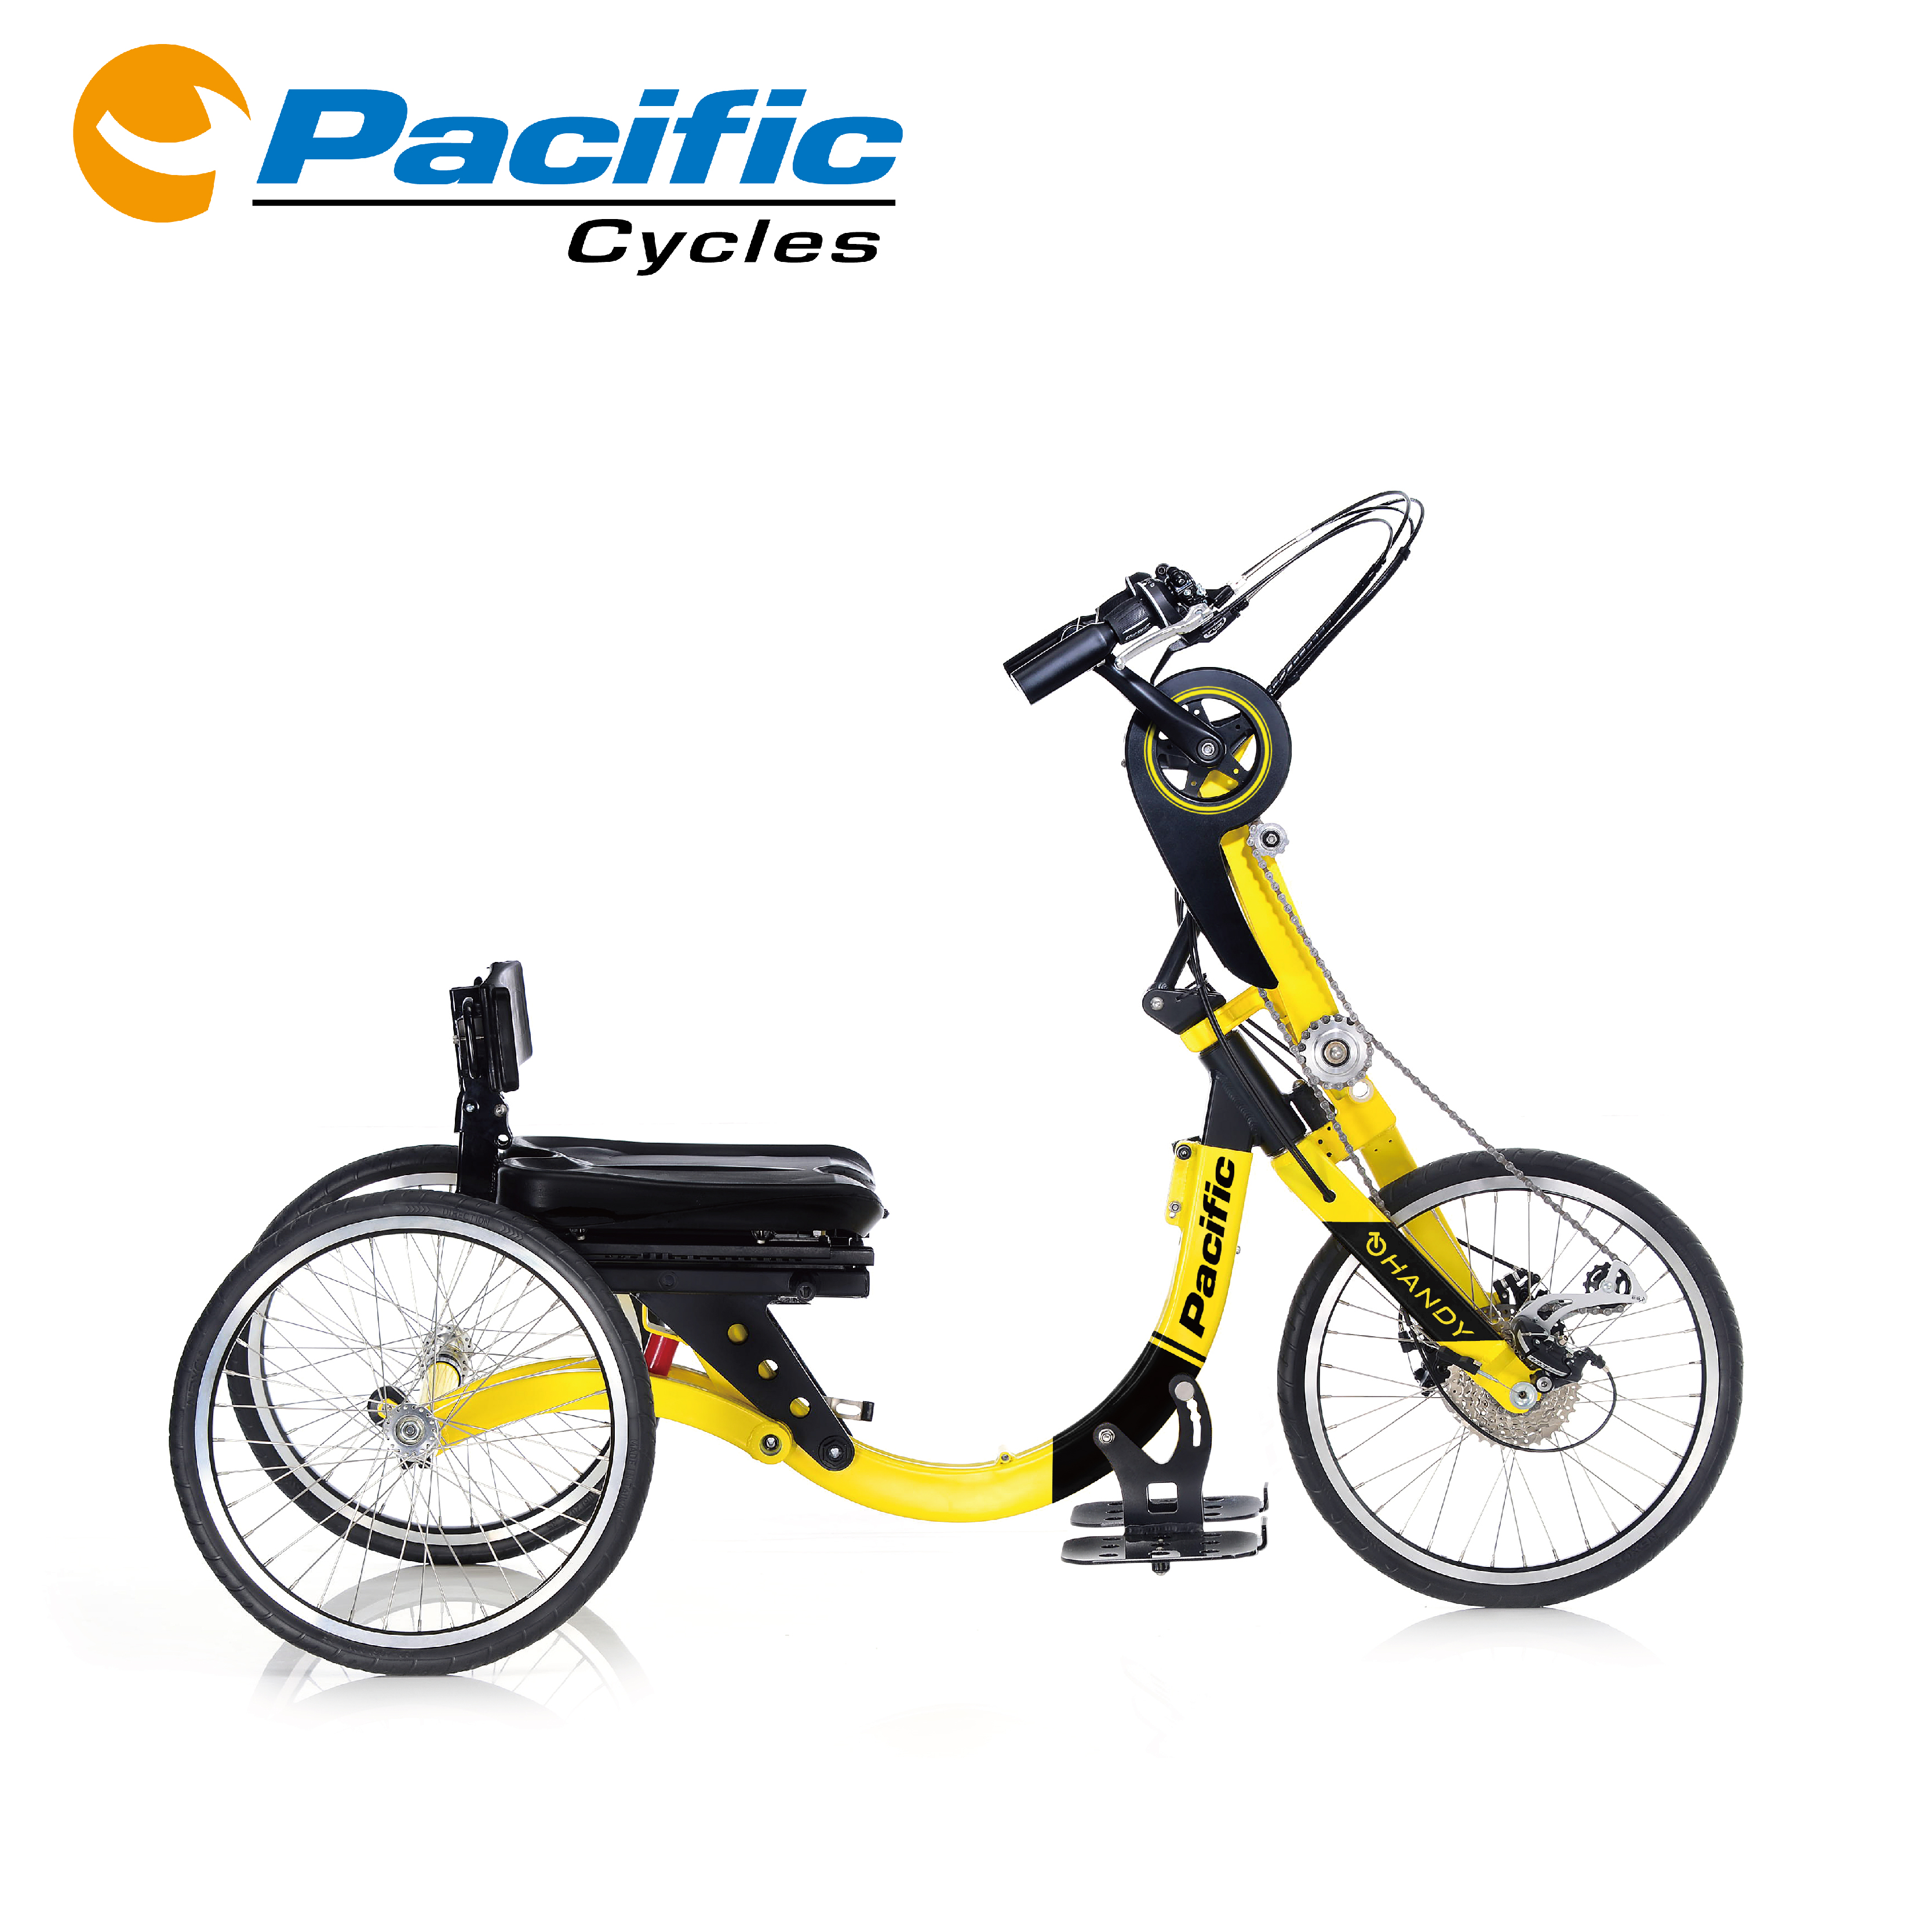 Pacific Cycles Inc.